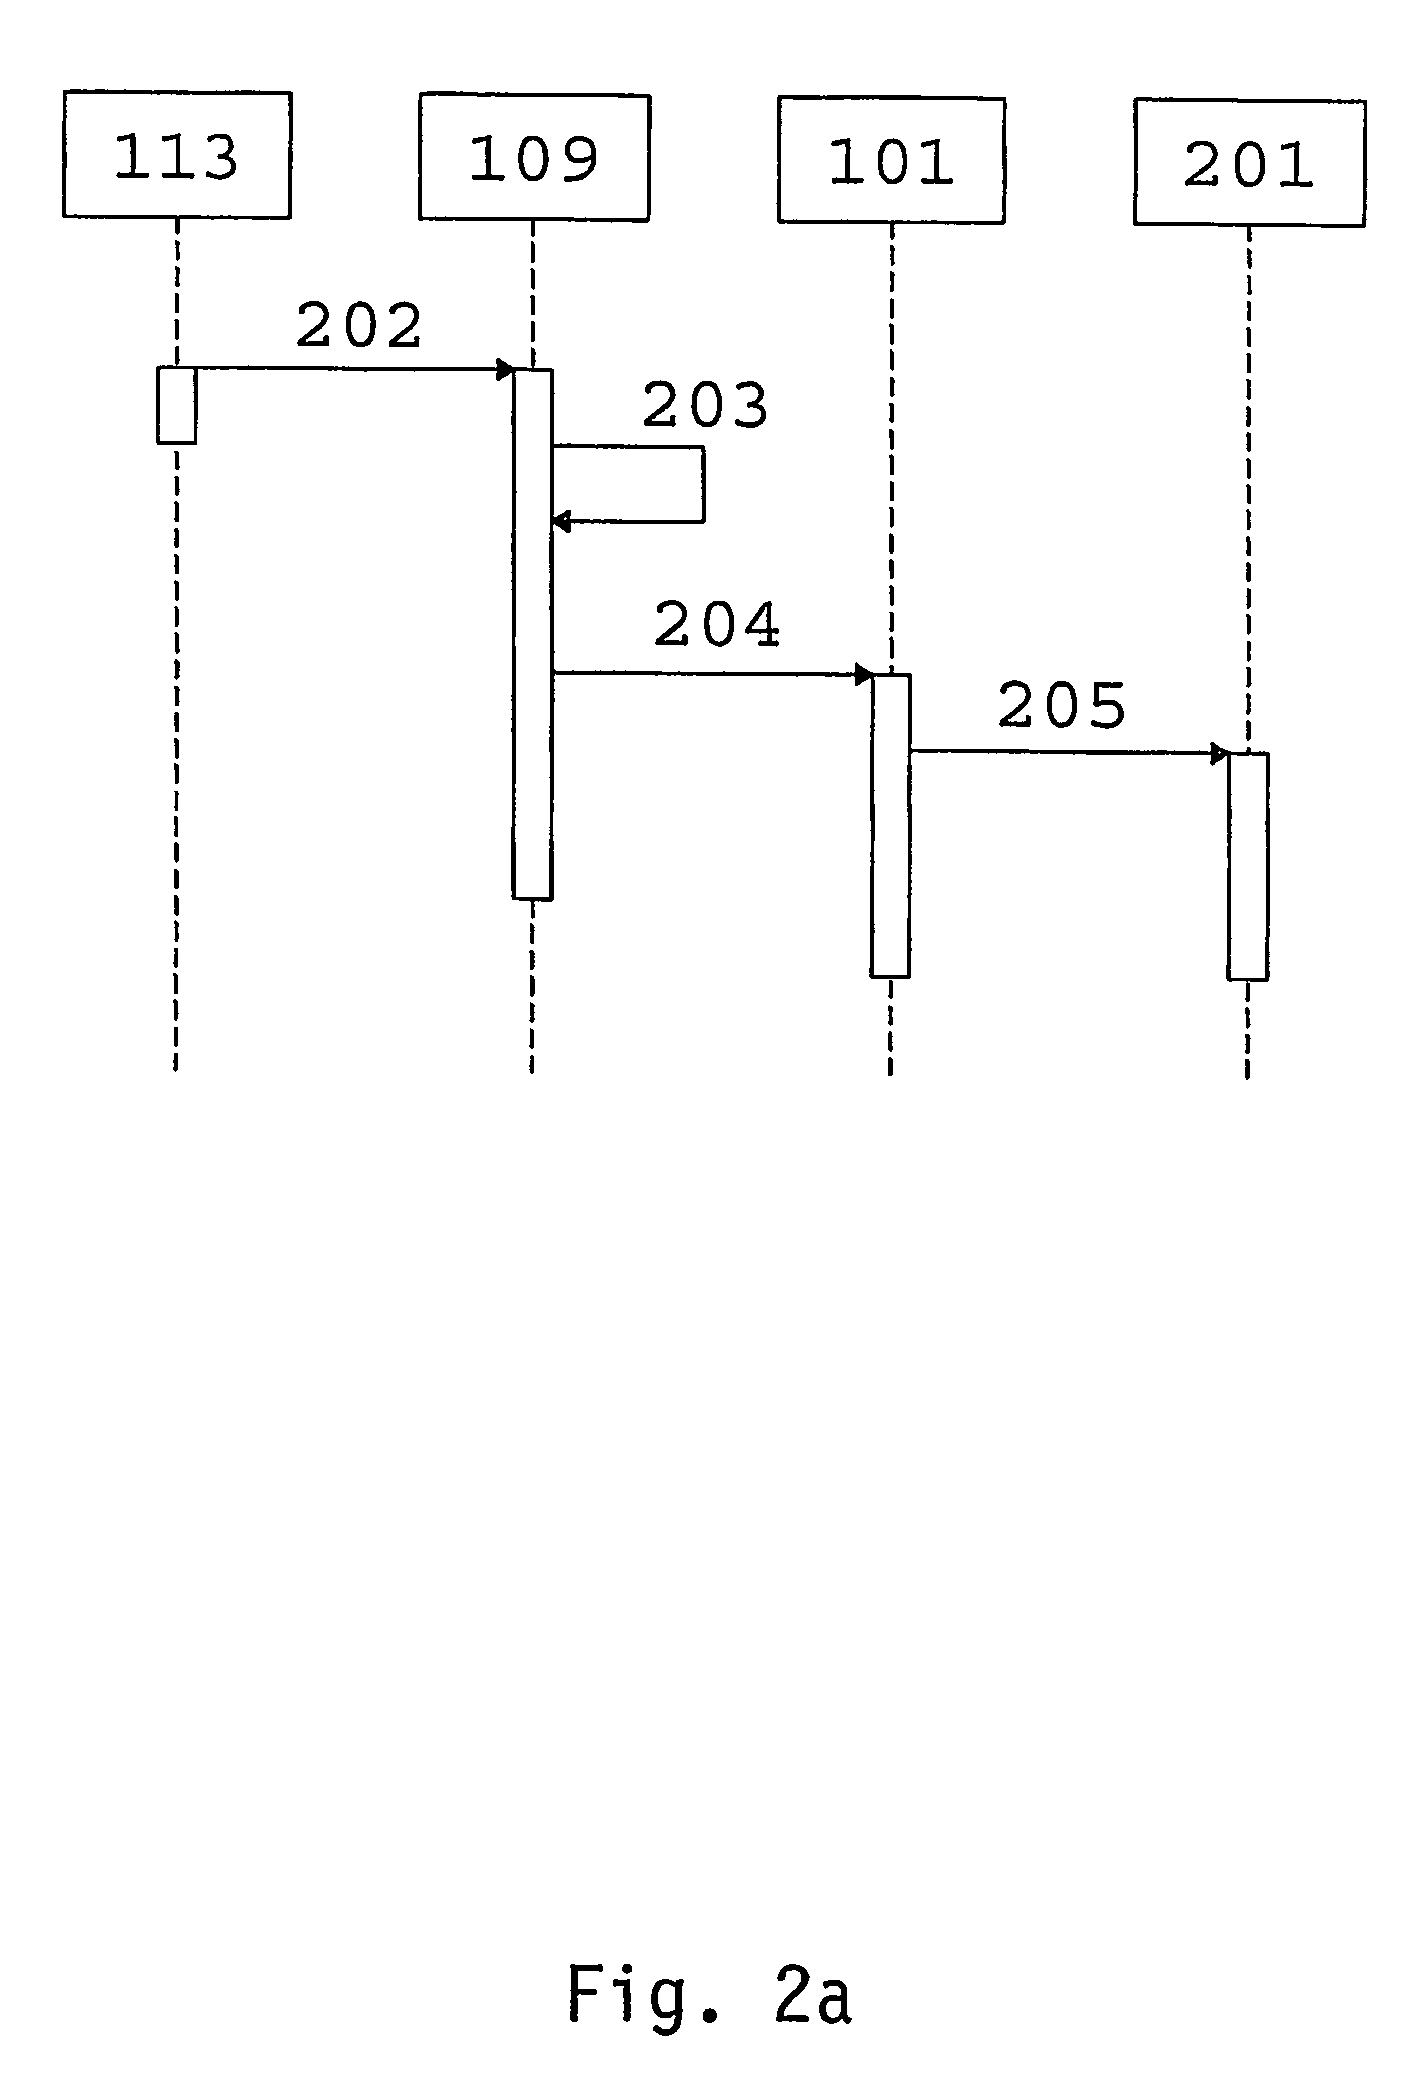 Method and system for including location information in a ussd message by a network node